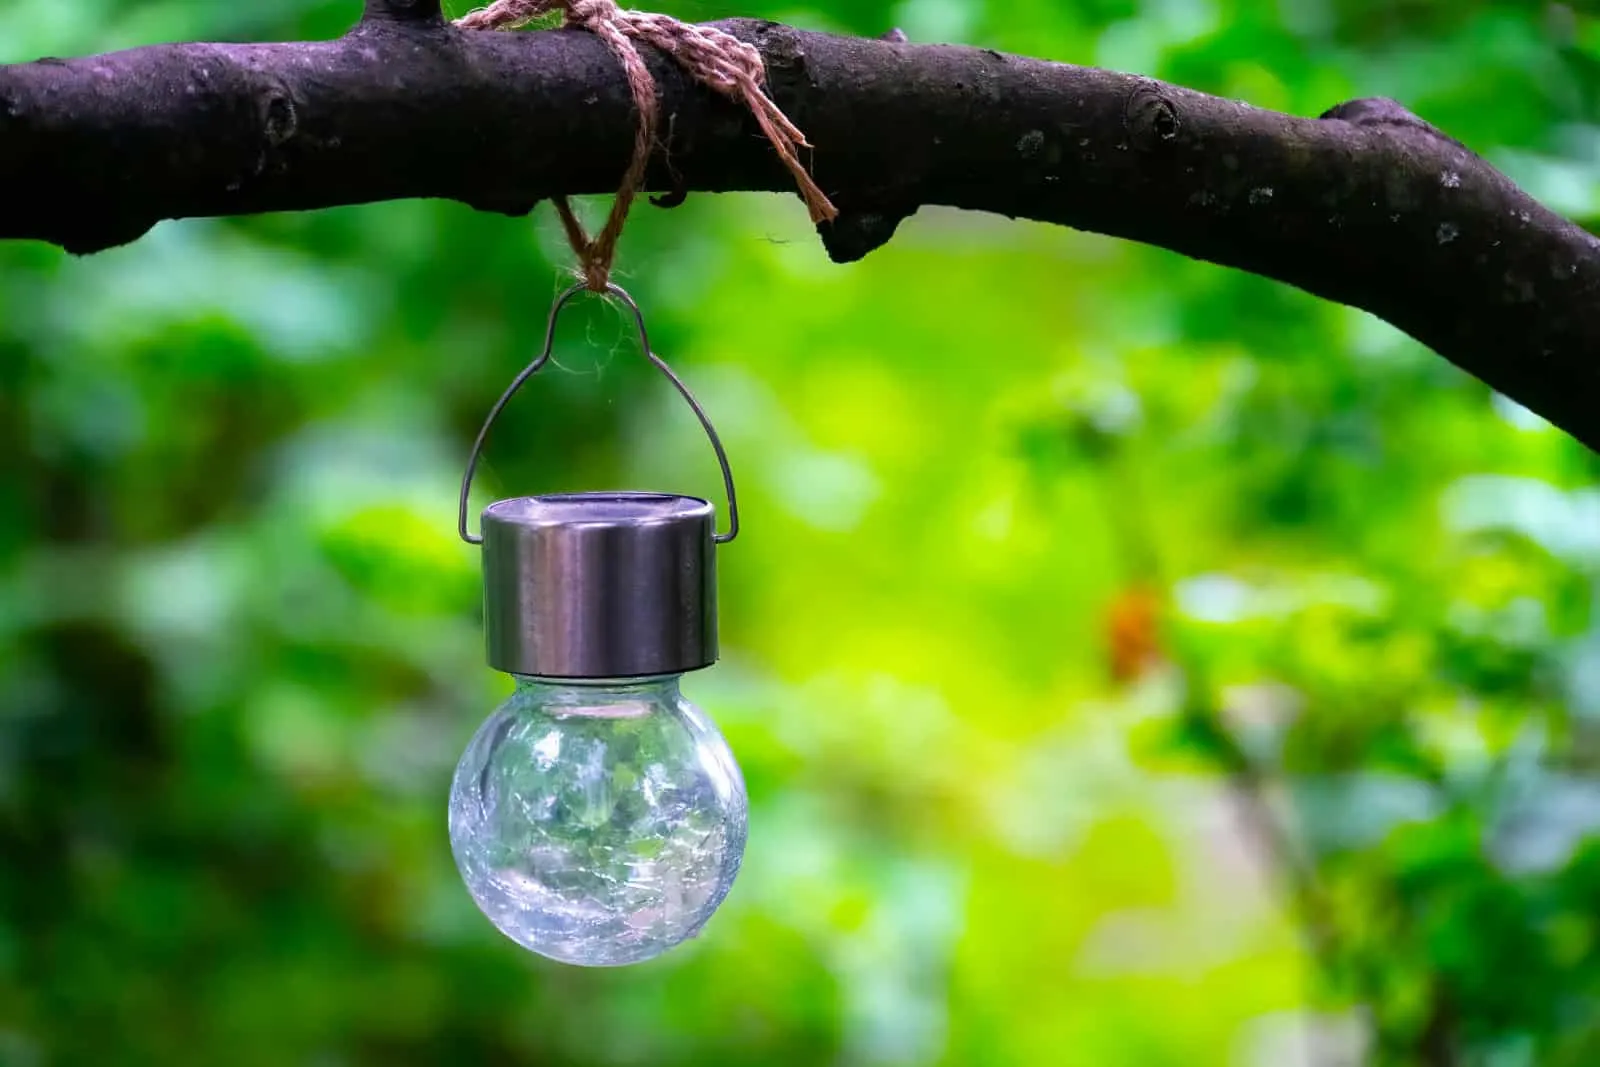 A solar hanging LED light cracked glass ball on the branch